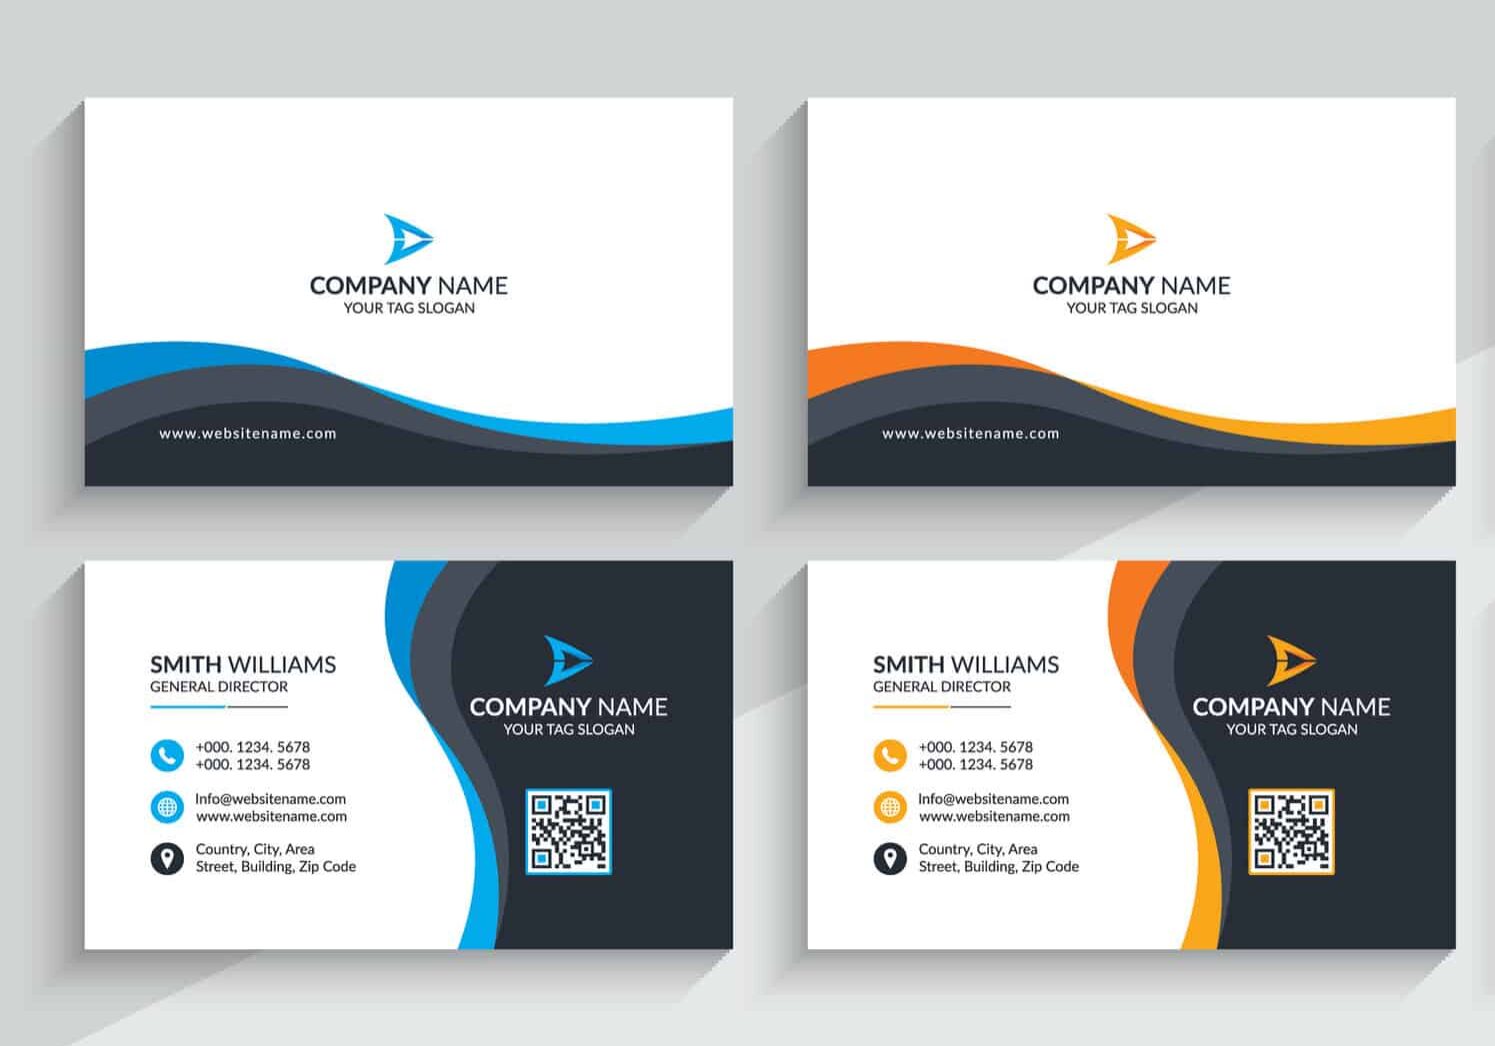 Creative And Modern Business Card Template. Stationery Design, Flat Design, Print Template, Vector illustration